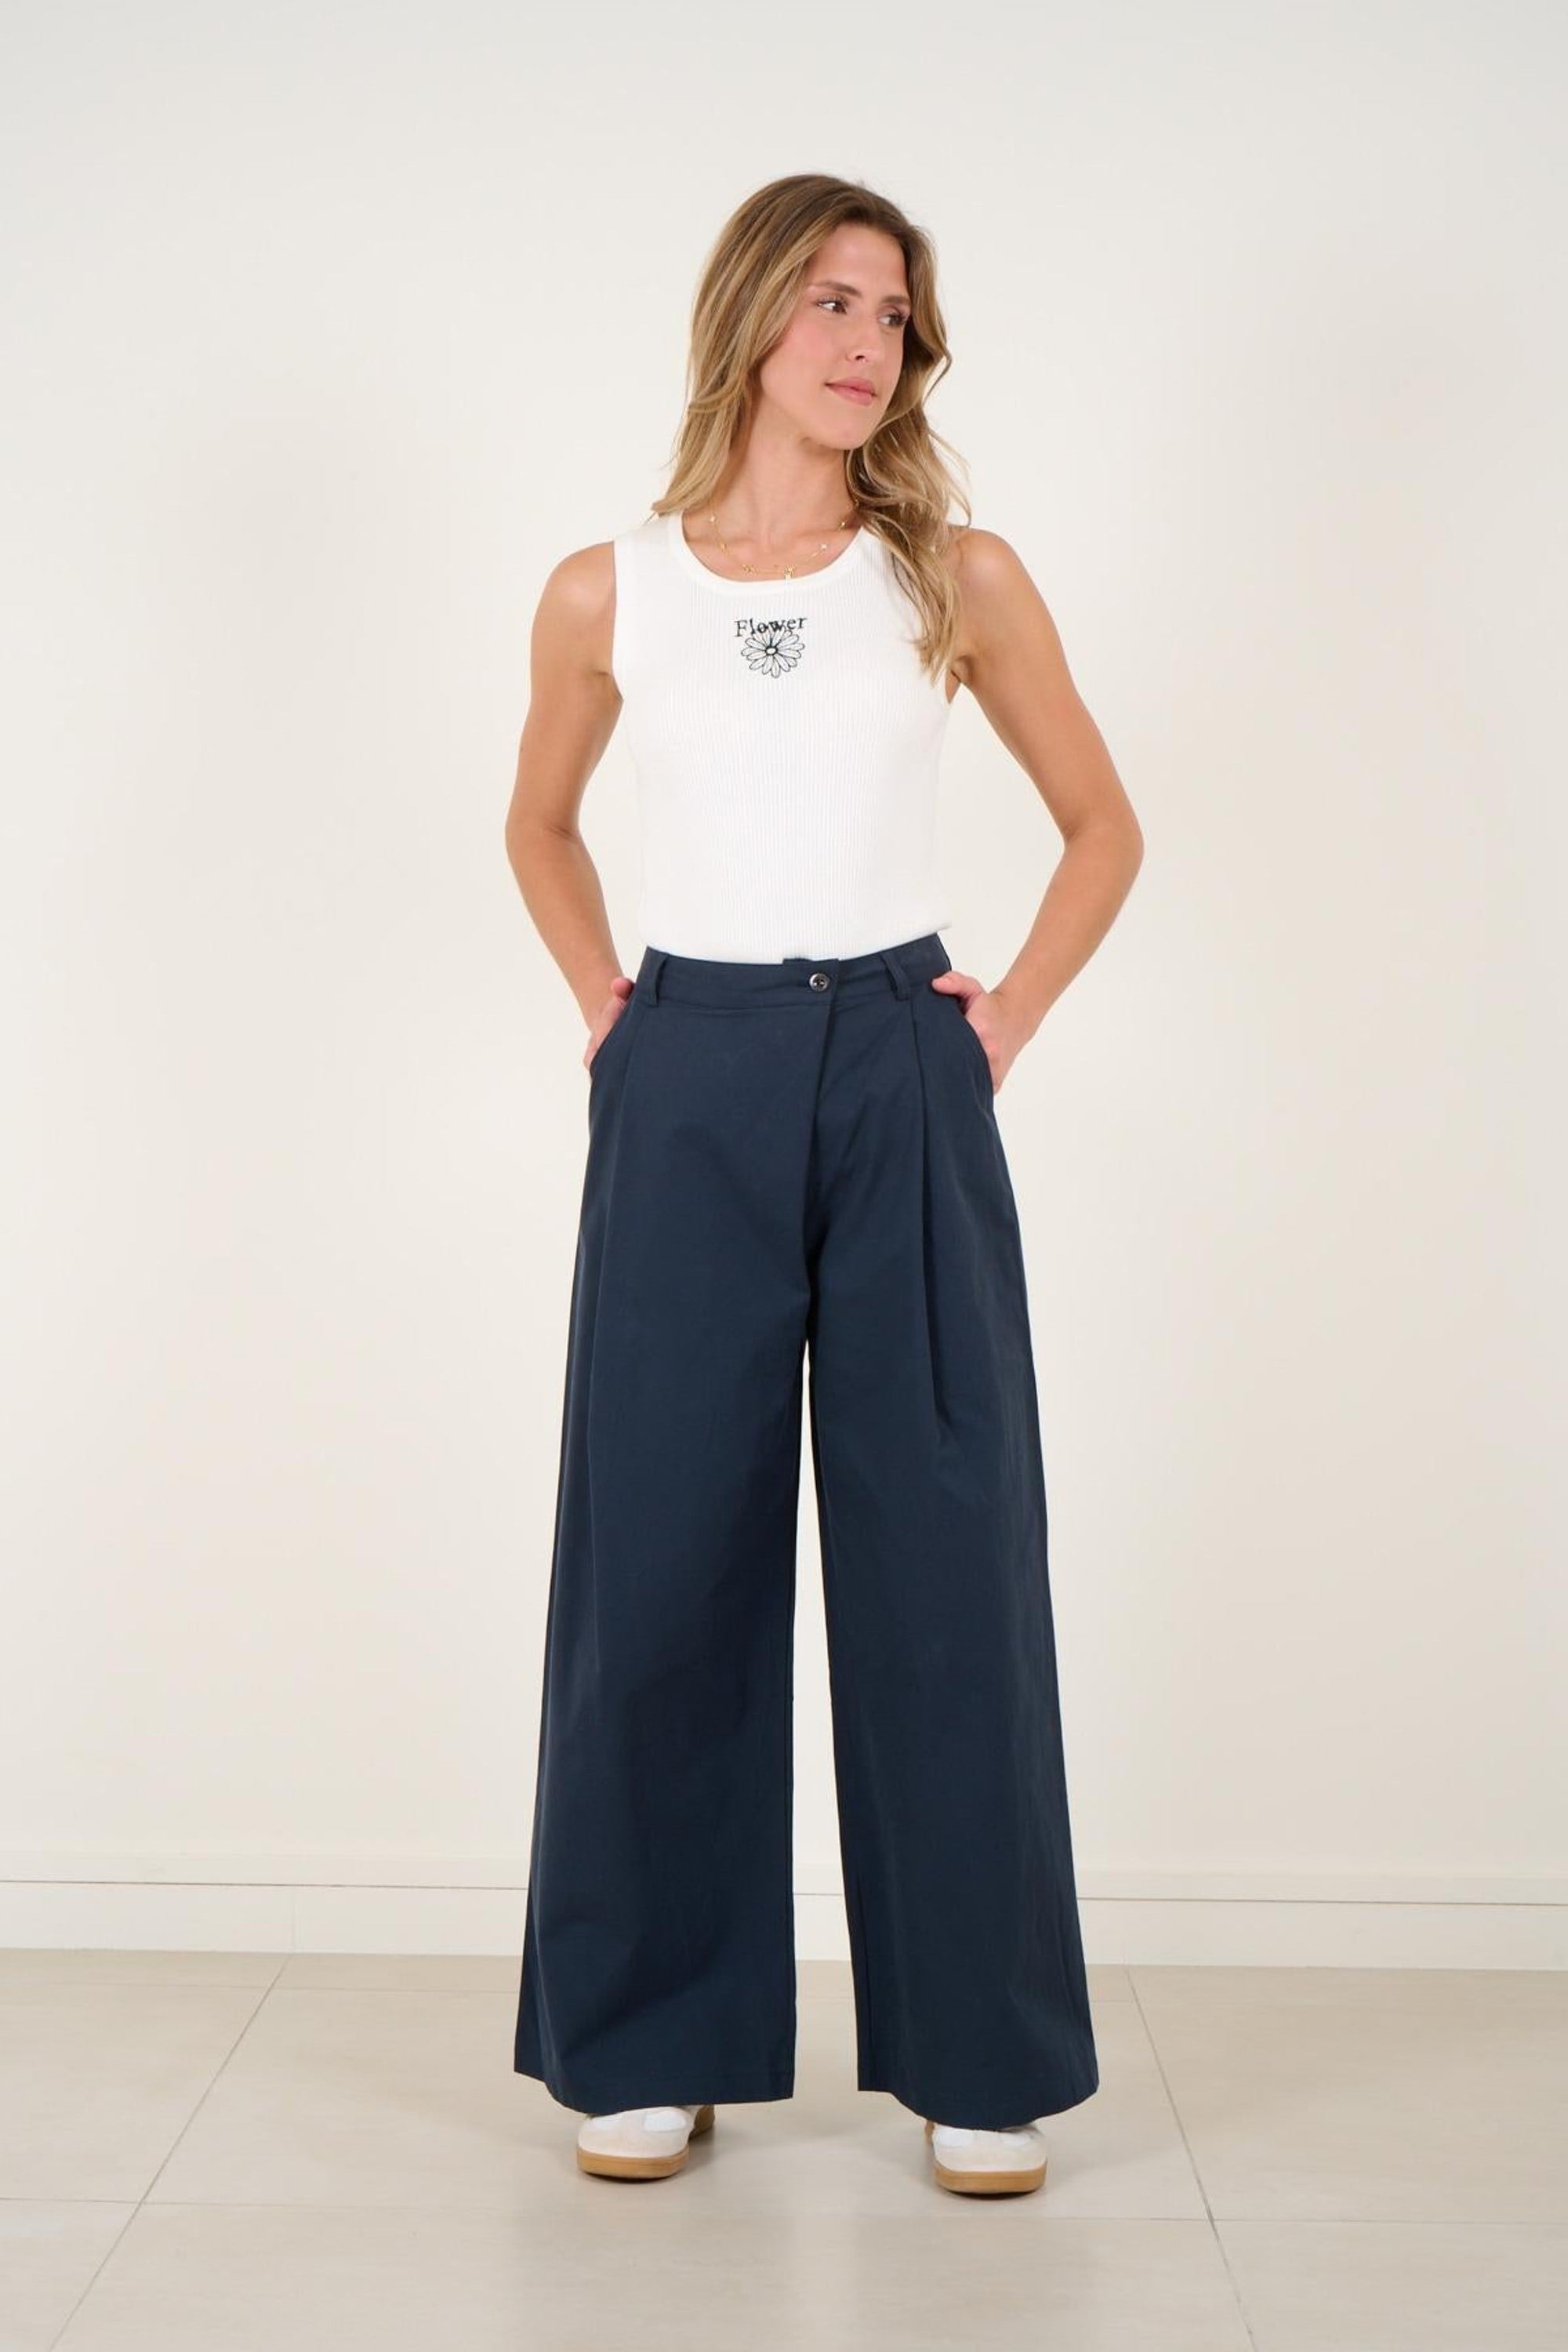 Clever Alice Lille Pant